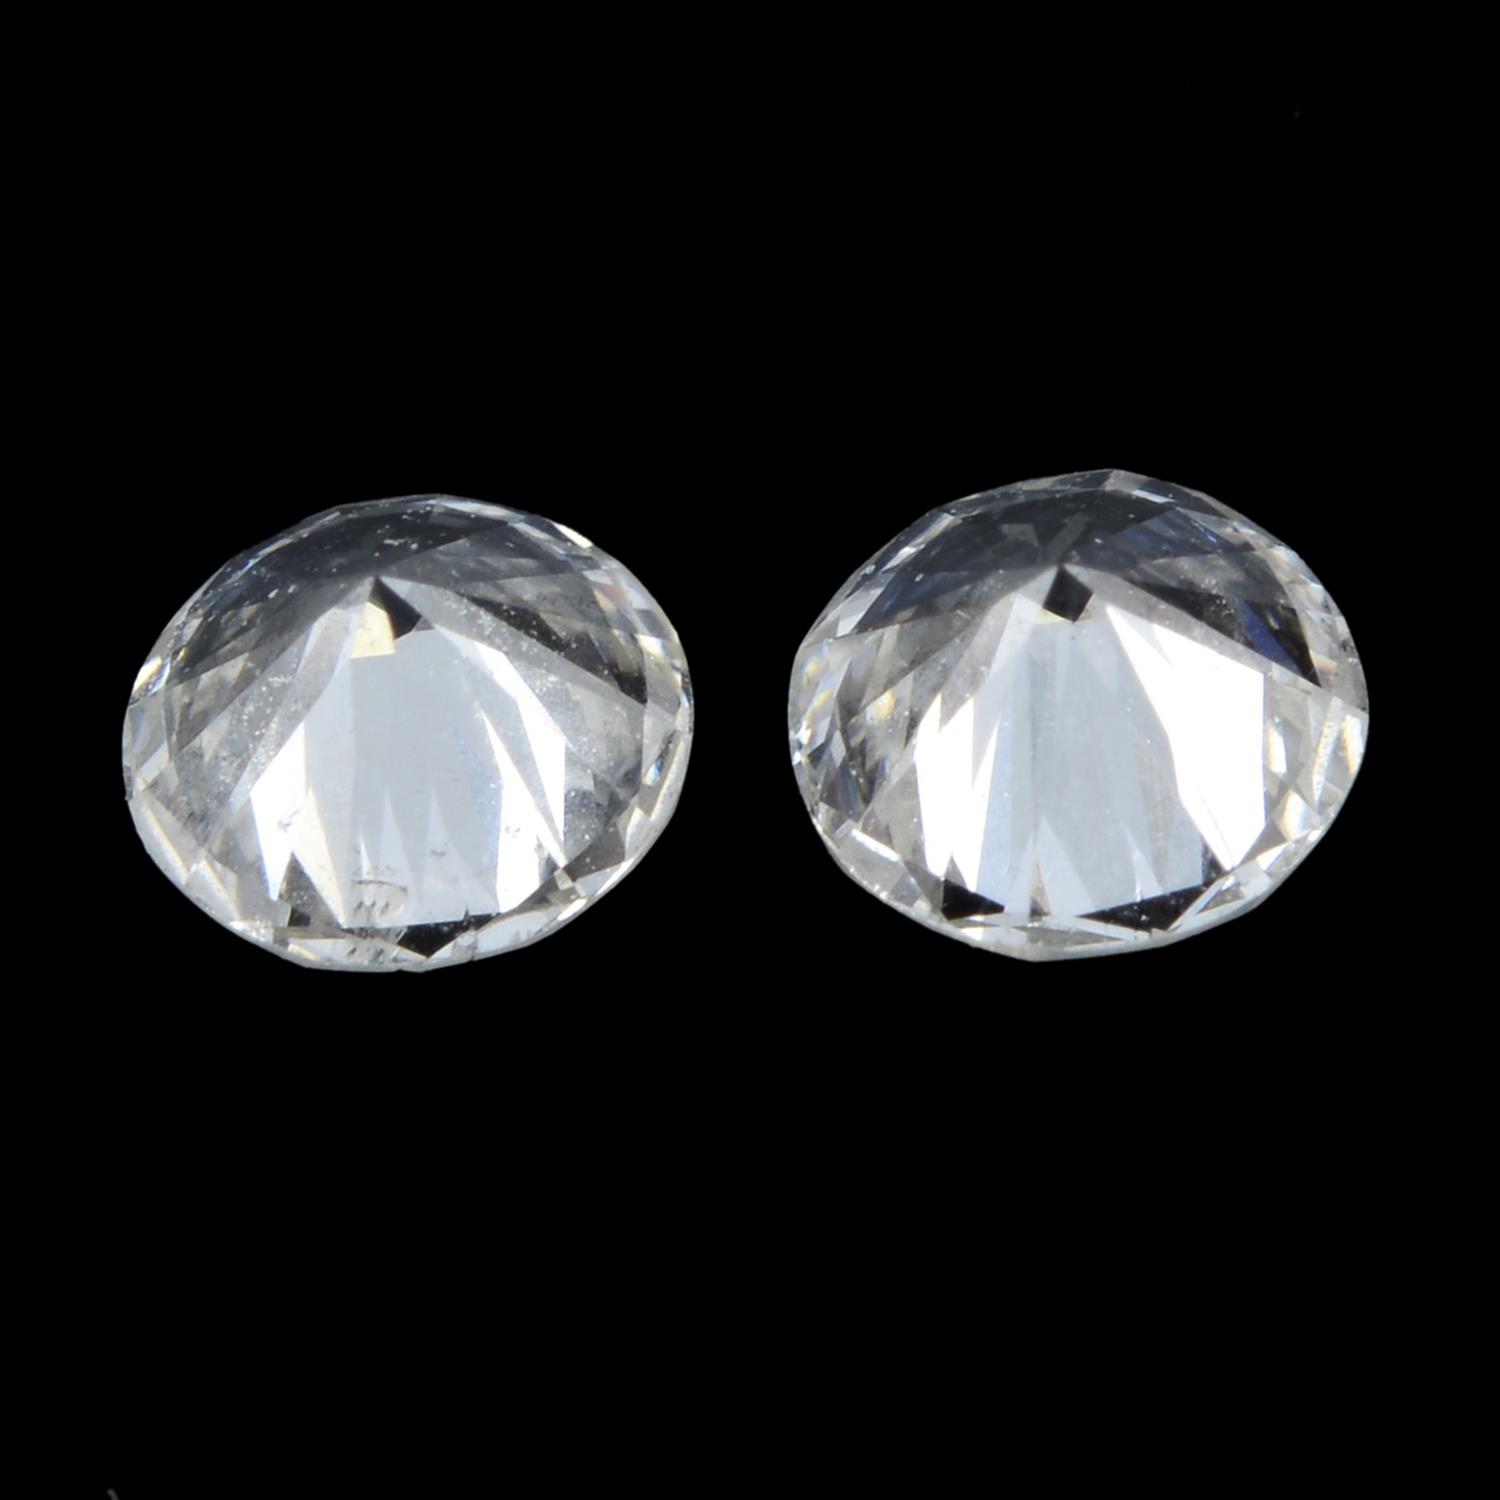 Pair of brilliant cut diamonds weighing 0.34ct - Image 2 of 2